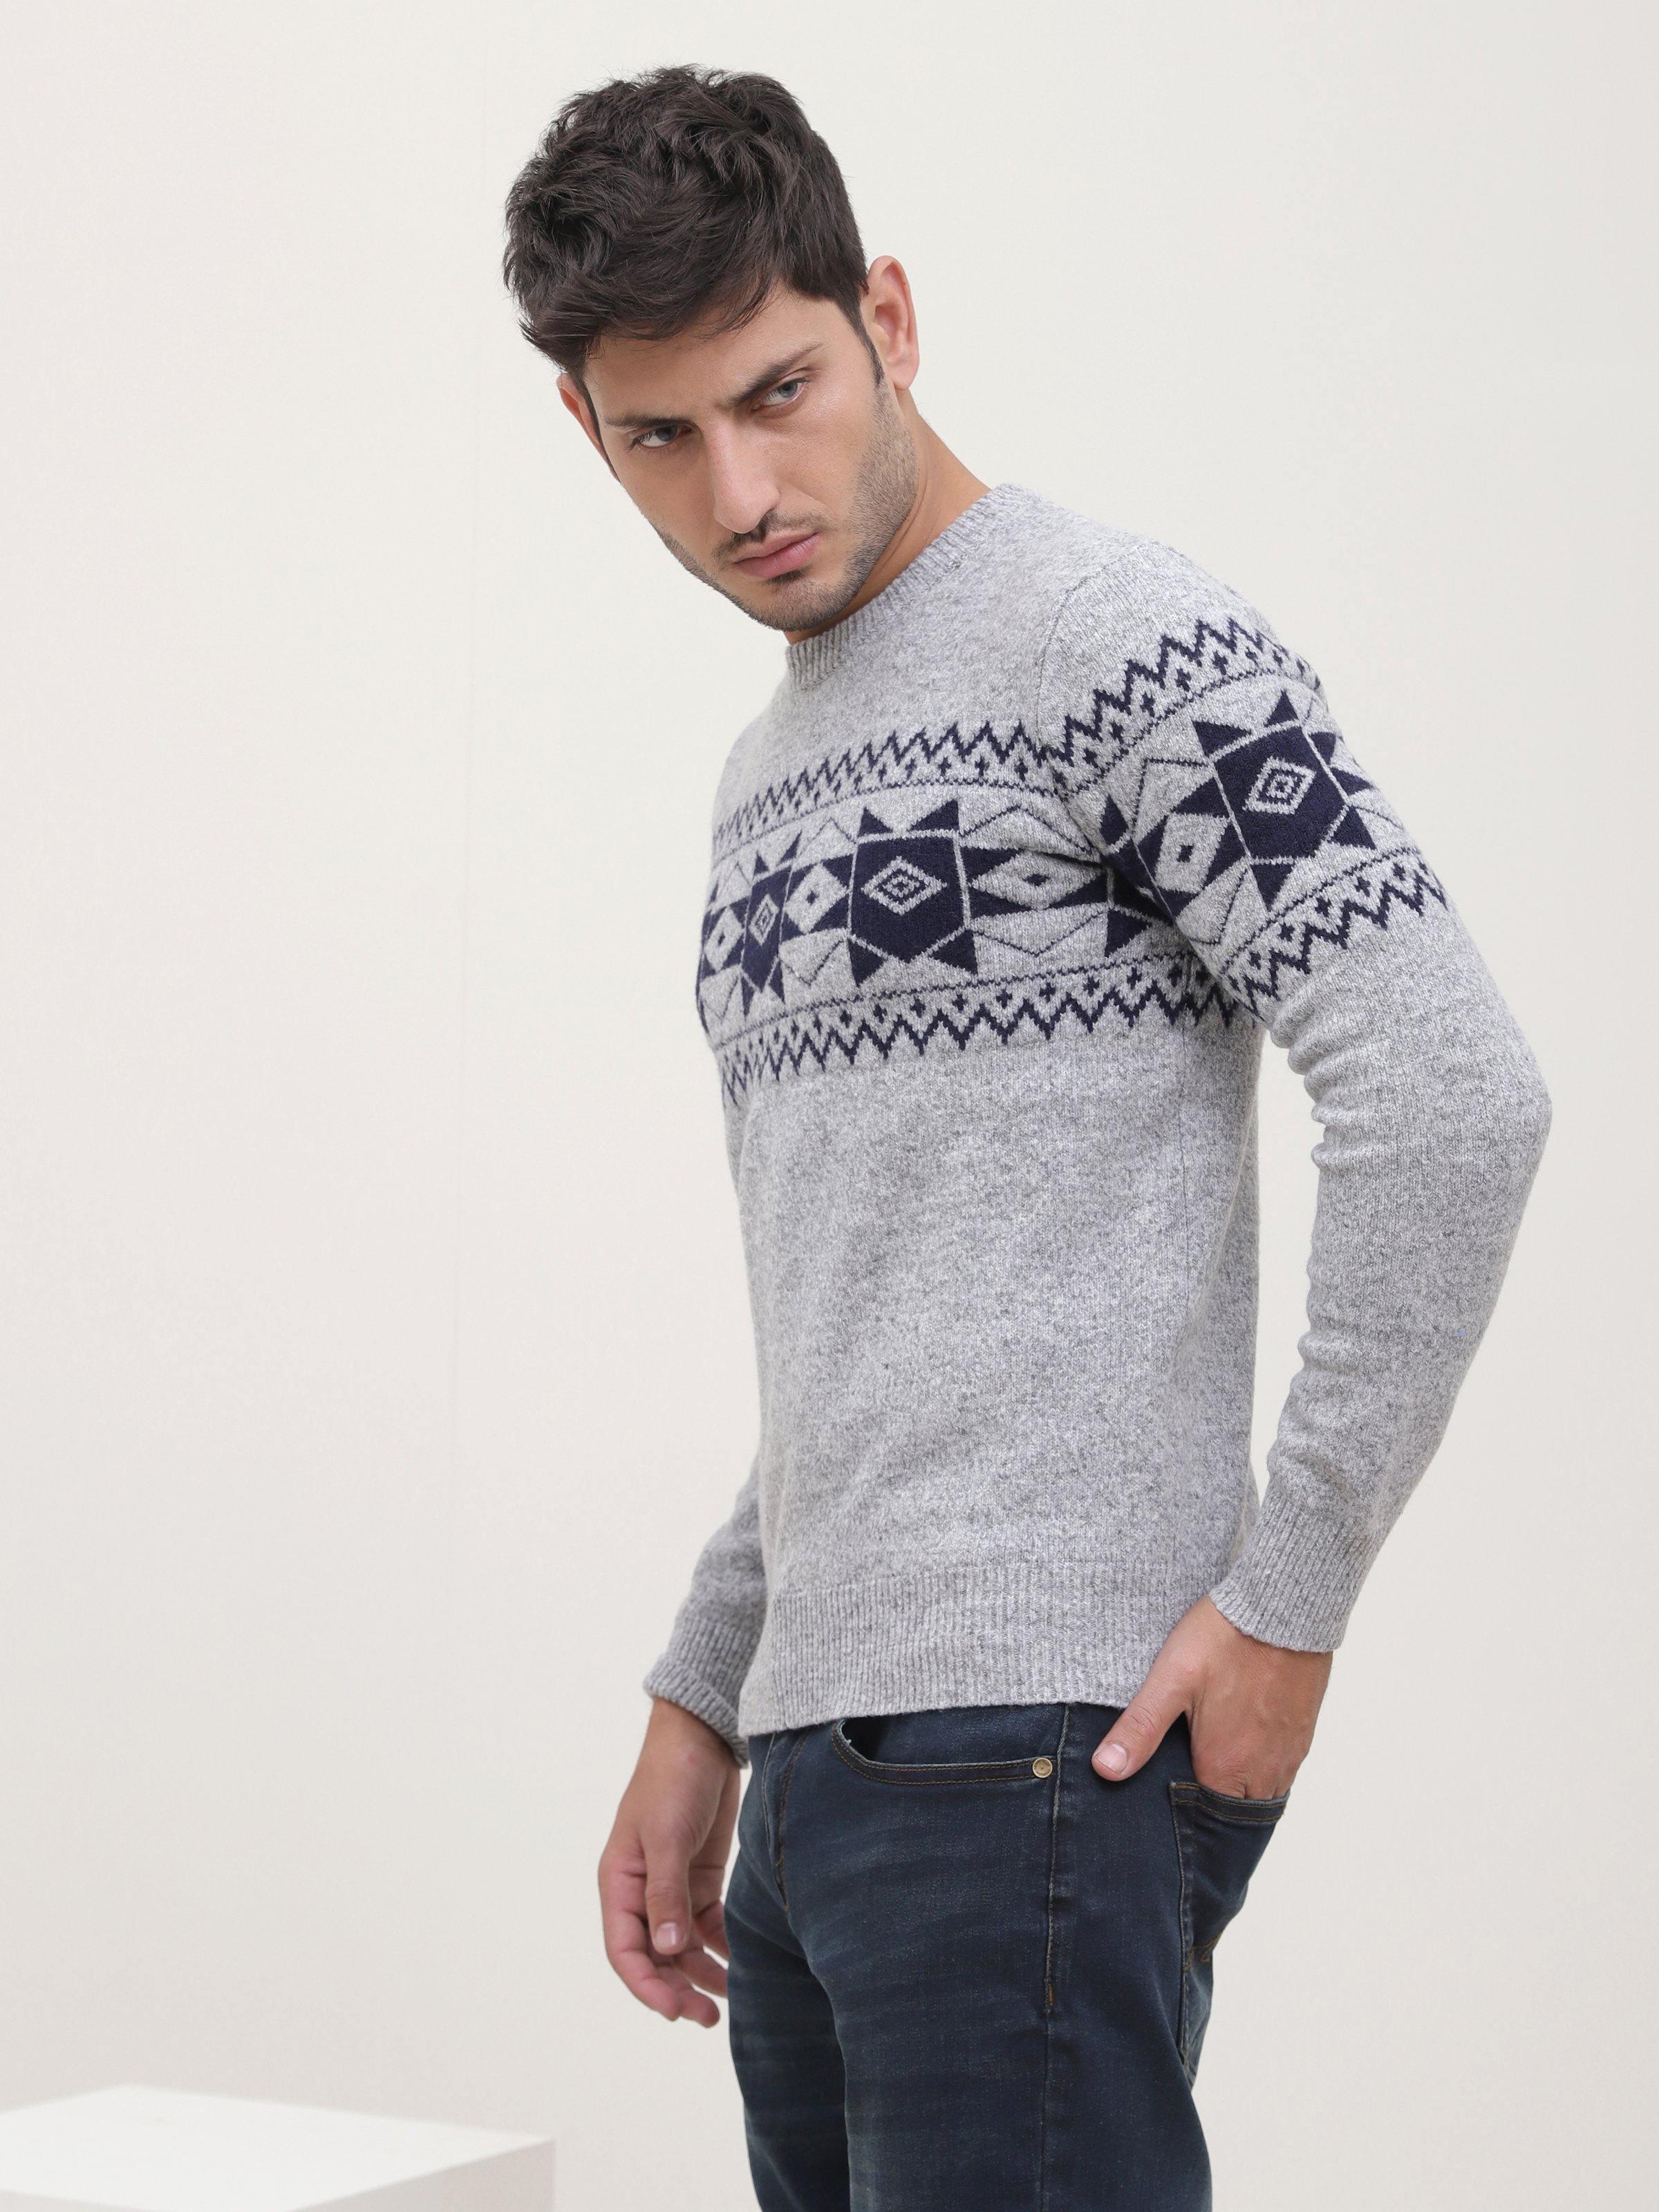 SWEATER ROUND NECK FULL SLEEVE GREY BLUE at Charcoal Clothing